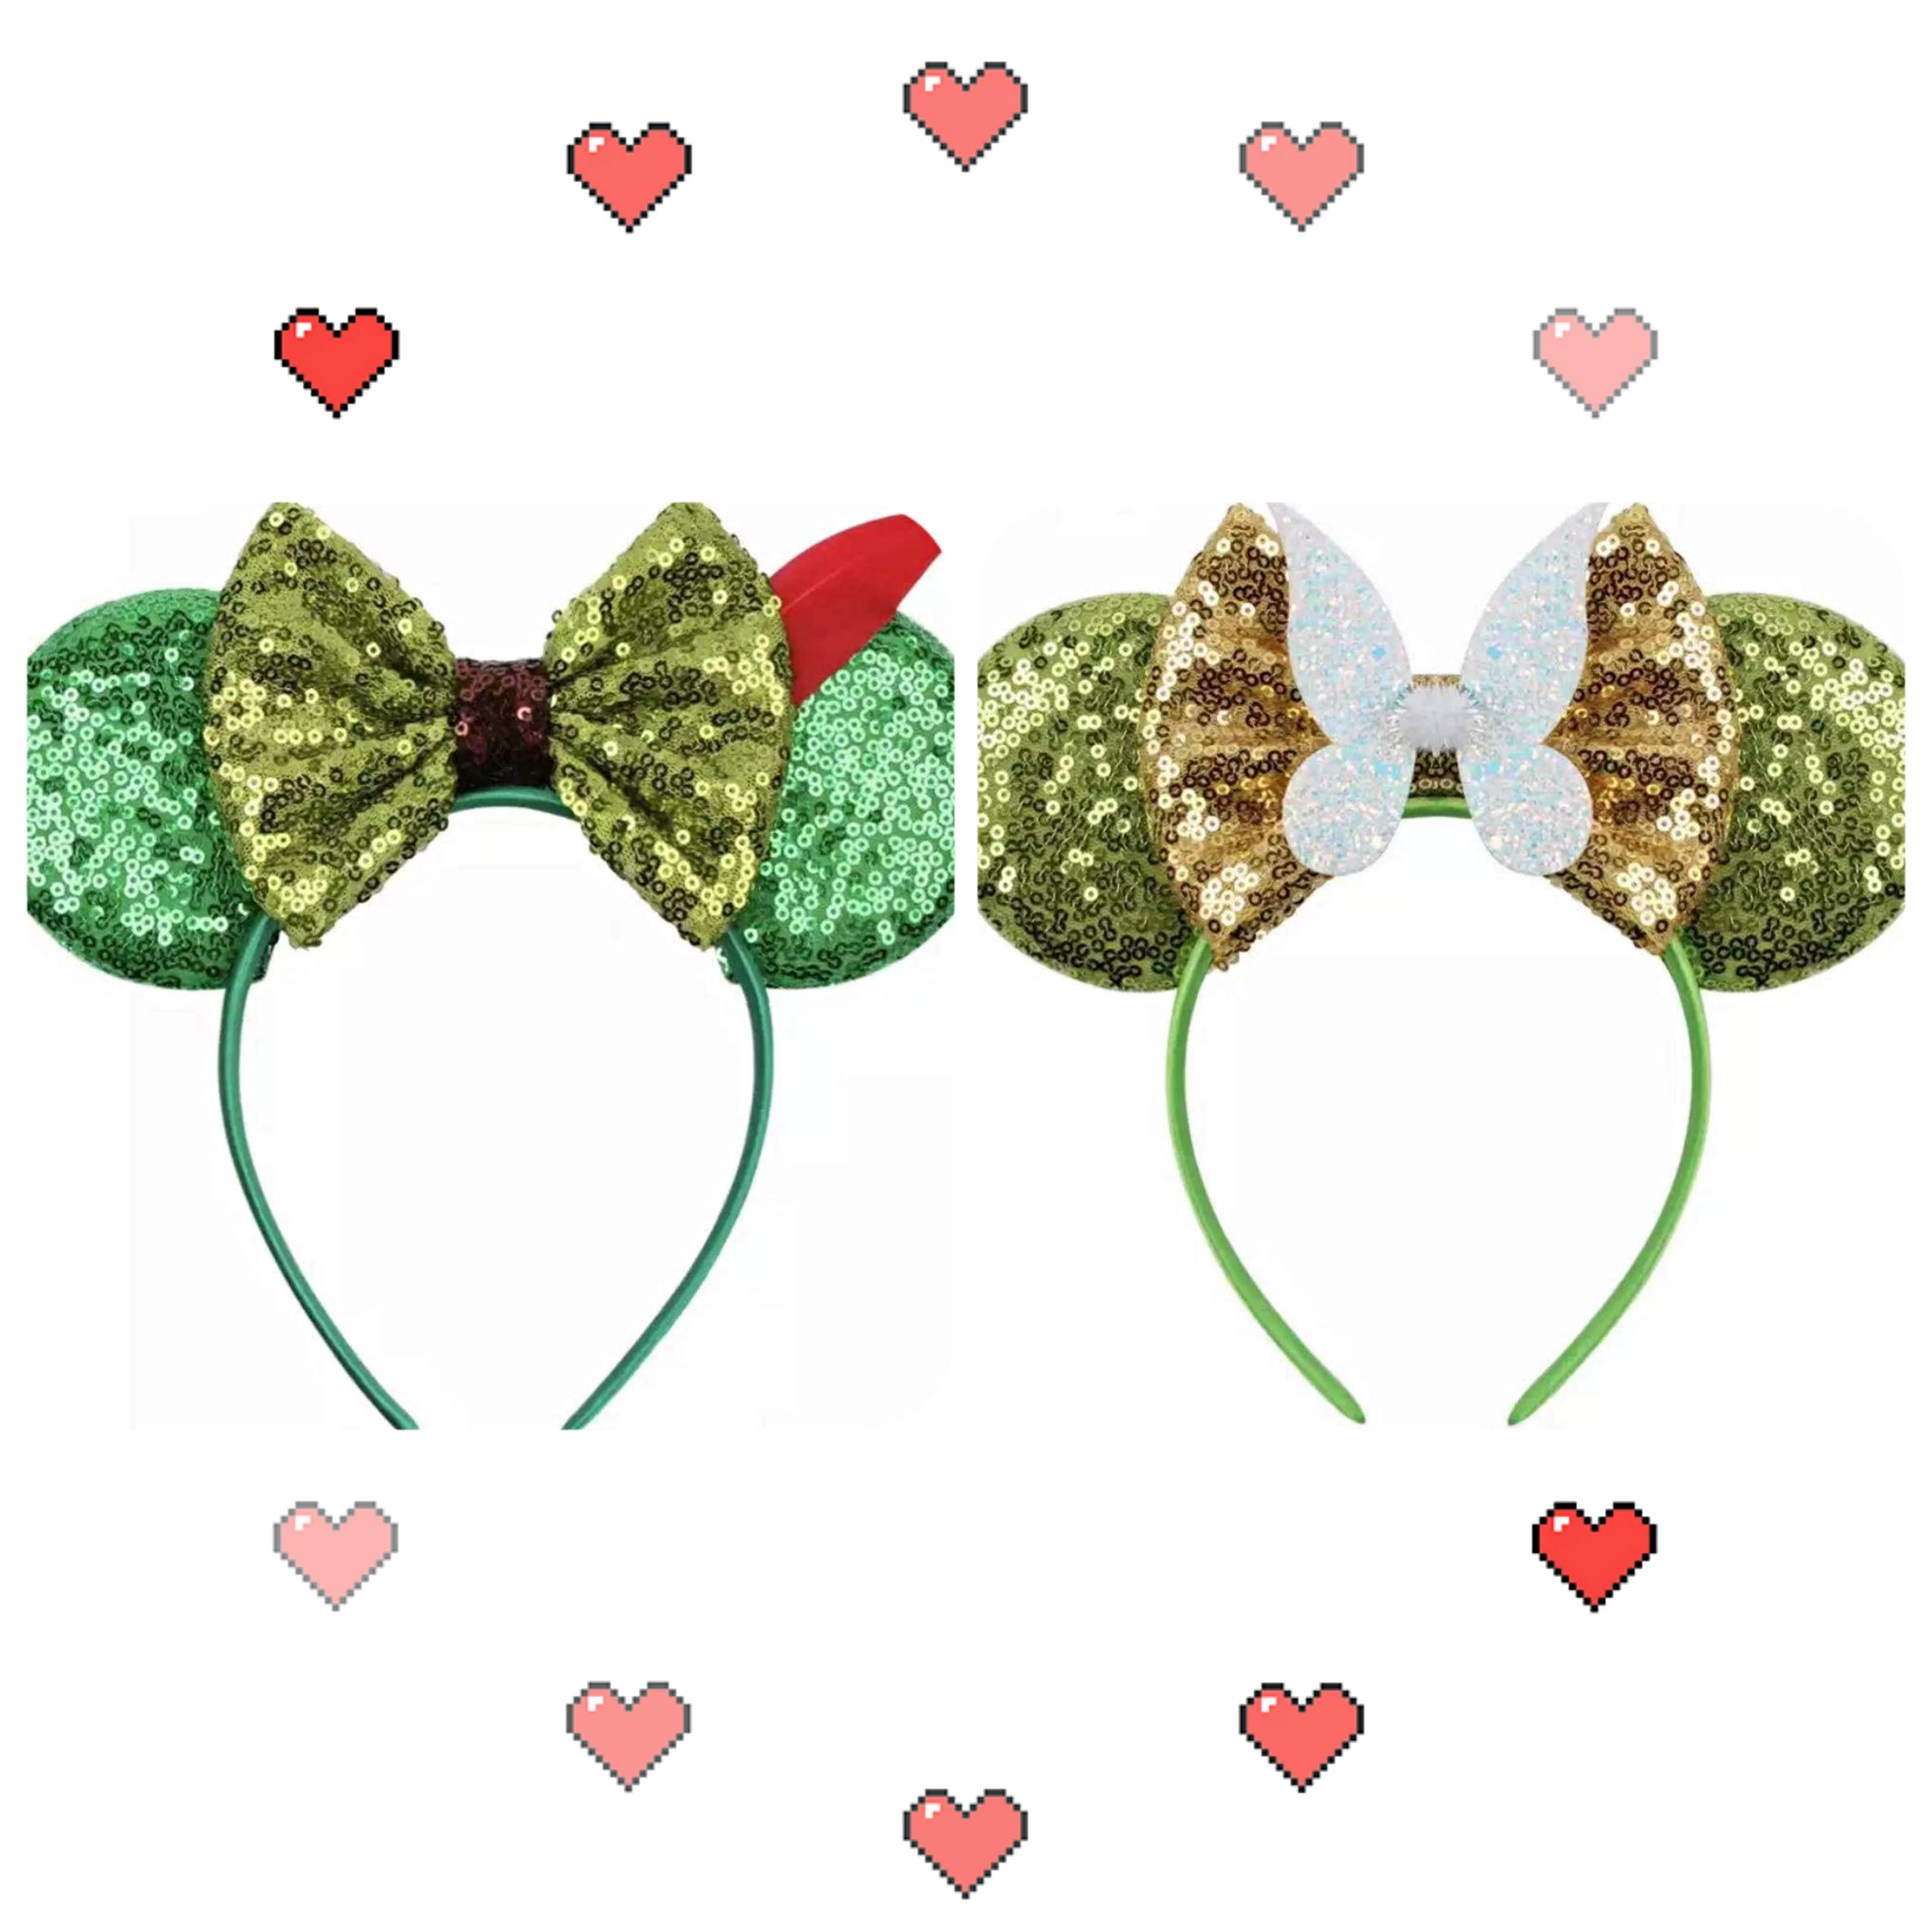 Tinkerbell Peter Pan Inspired Minnie Mouse Ears